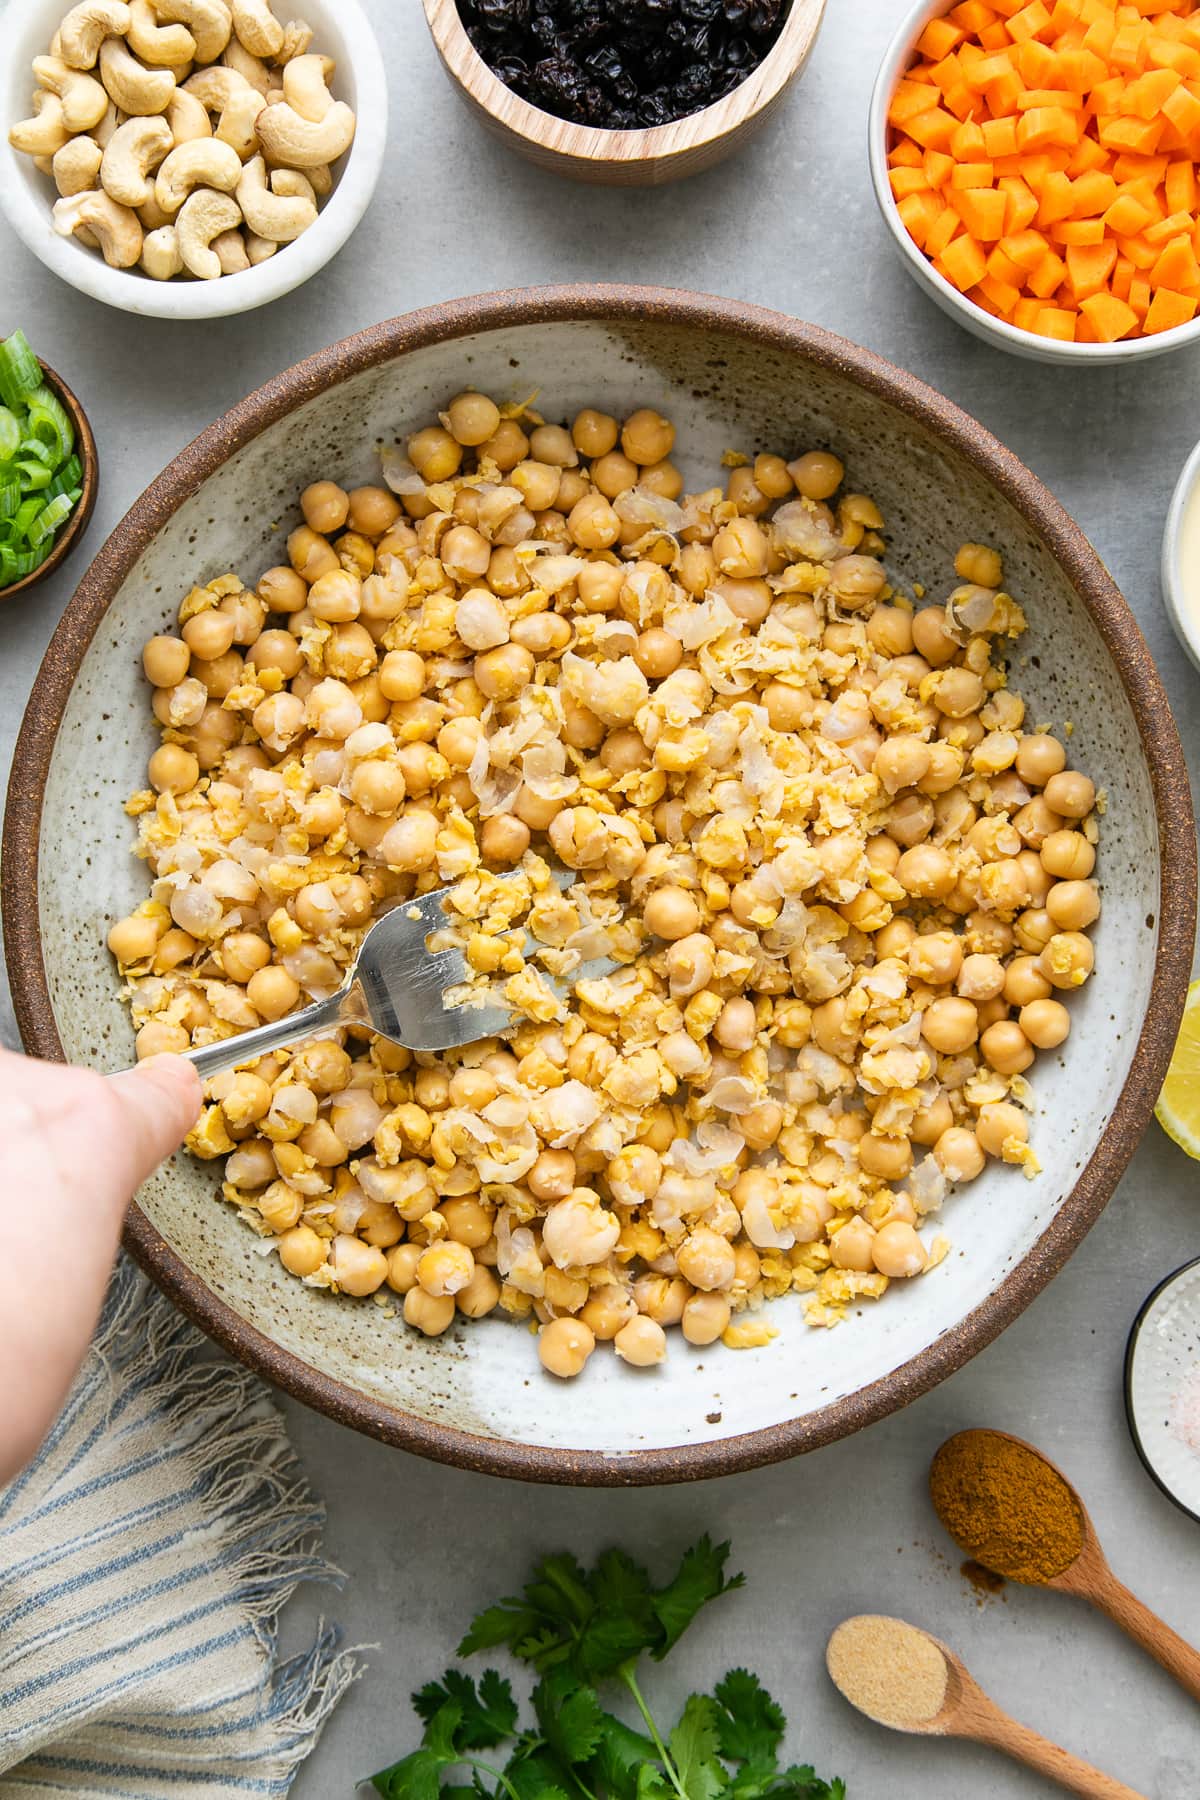 top down view showing the process of mashing chickpeas with items surrounding.